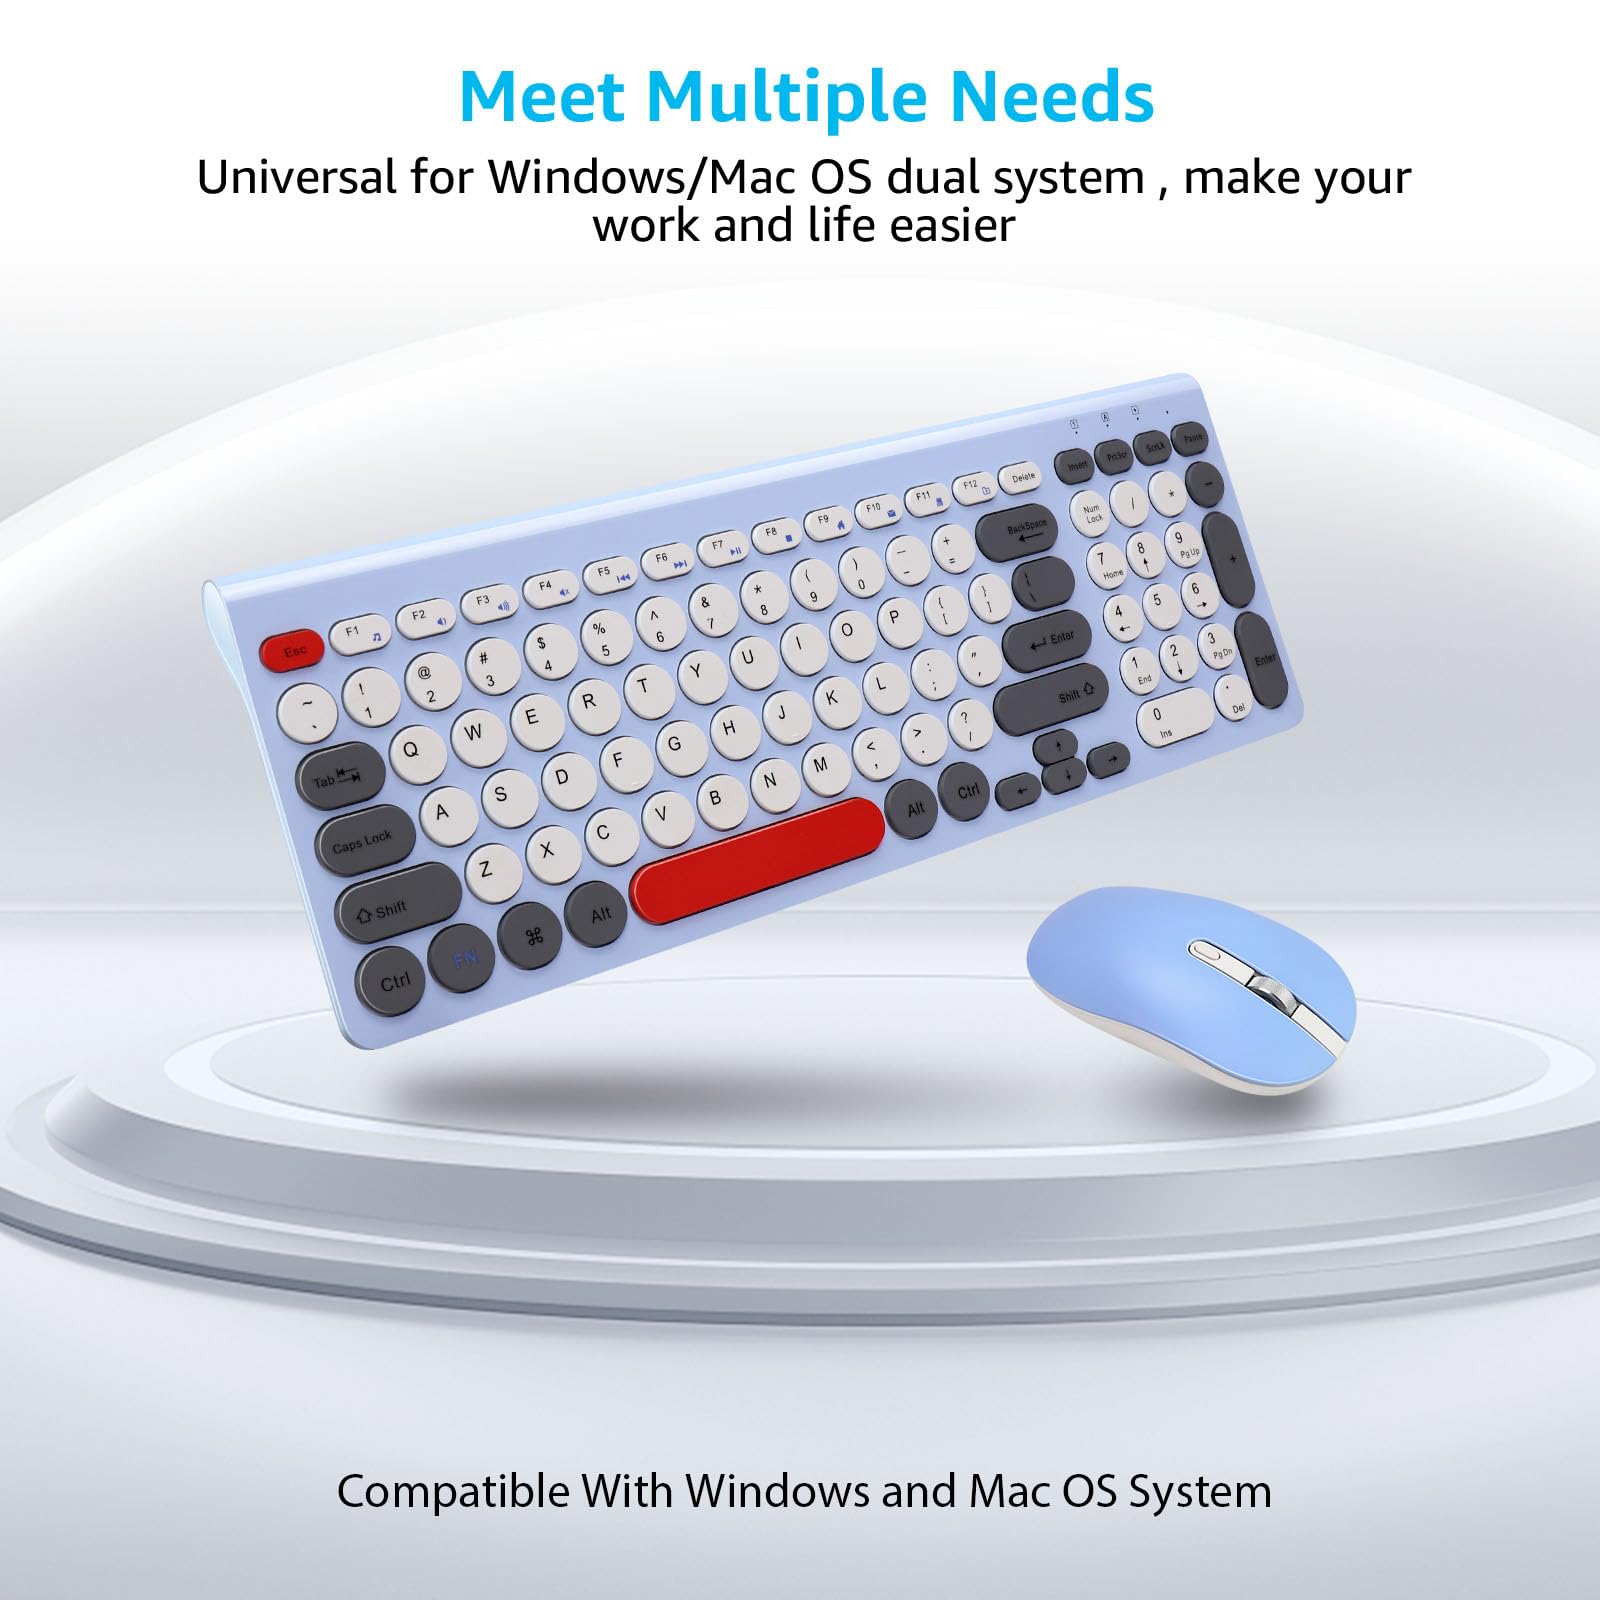 LeadsaiL Wireless Keyboard and Mouse Combo, Wireless USB Mouse and Computer Keyboard Set, Compact and Silent for Windows Laptop, Desktop, PC- Colorful